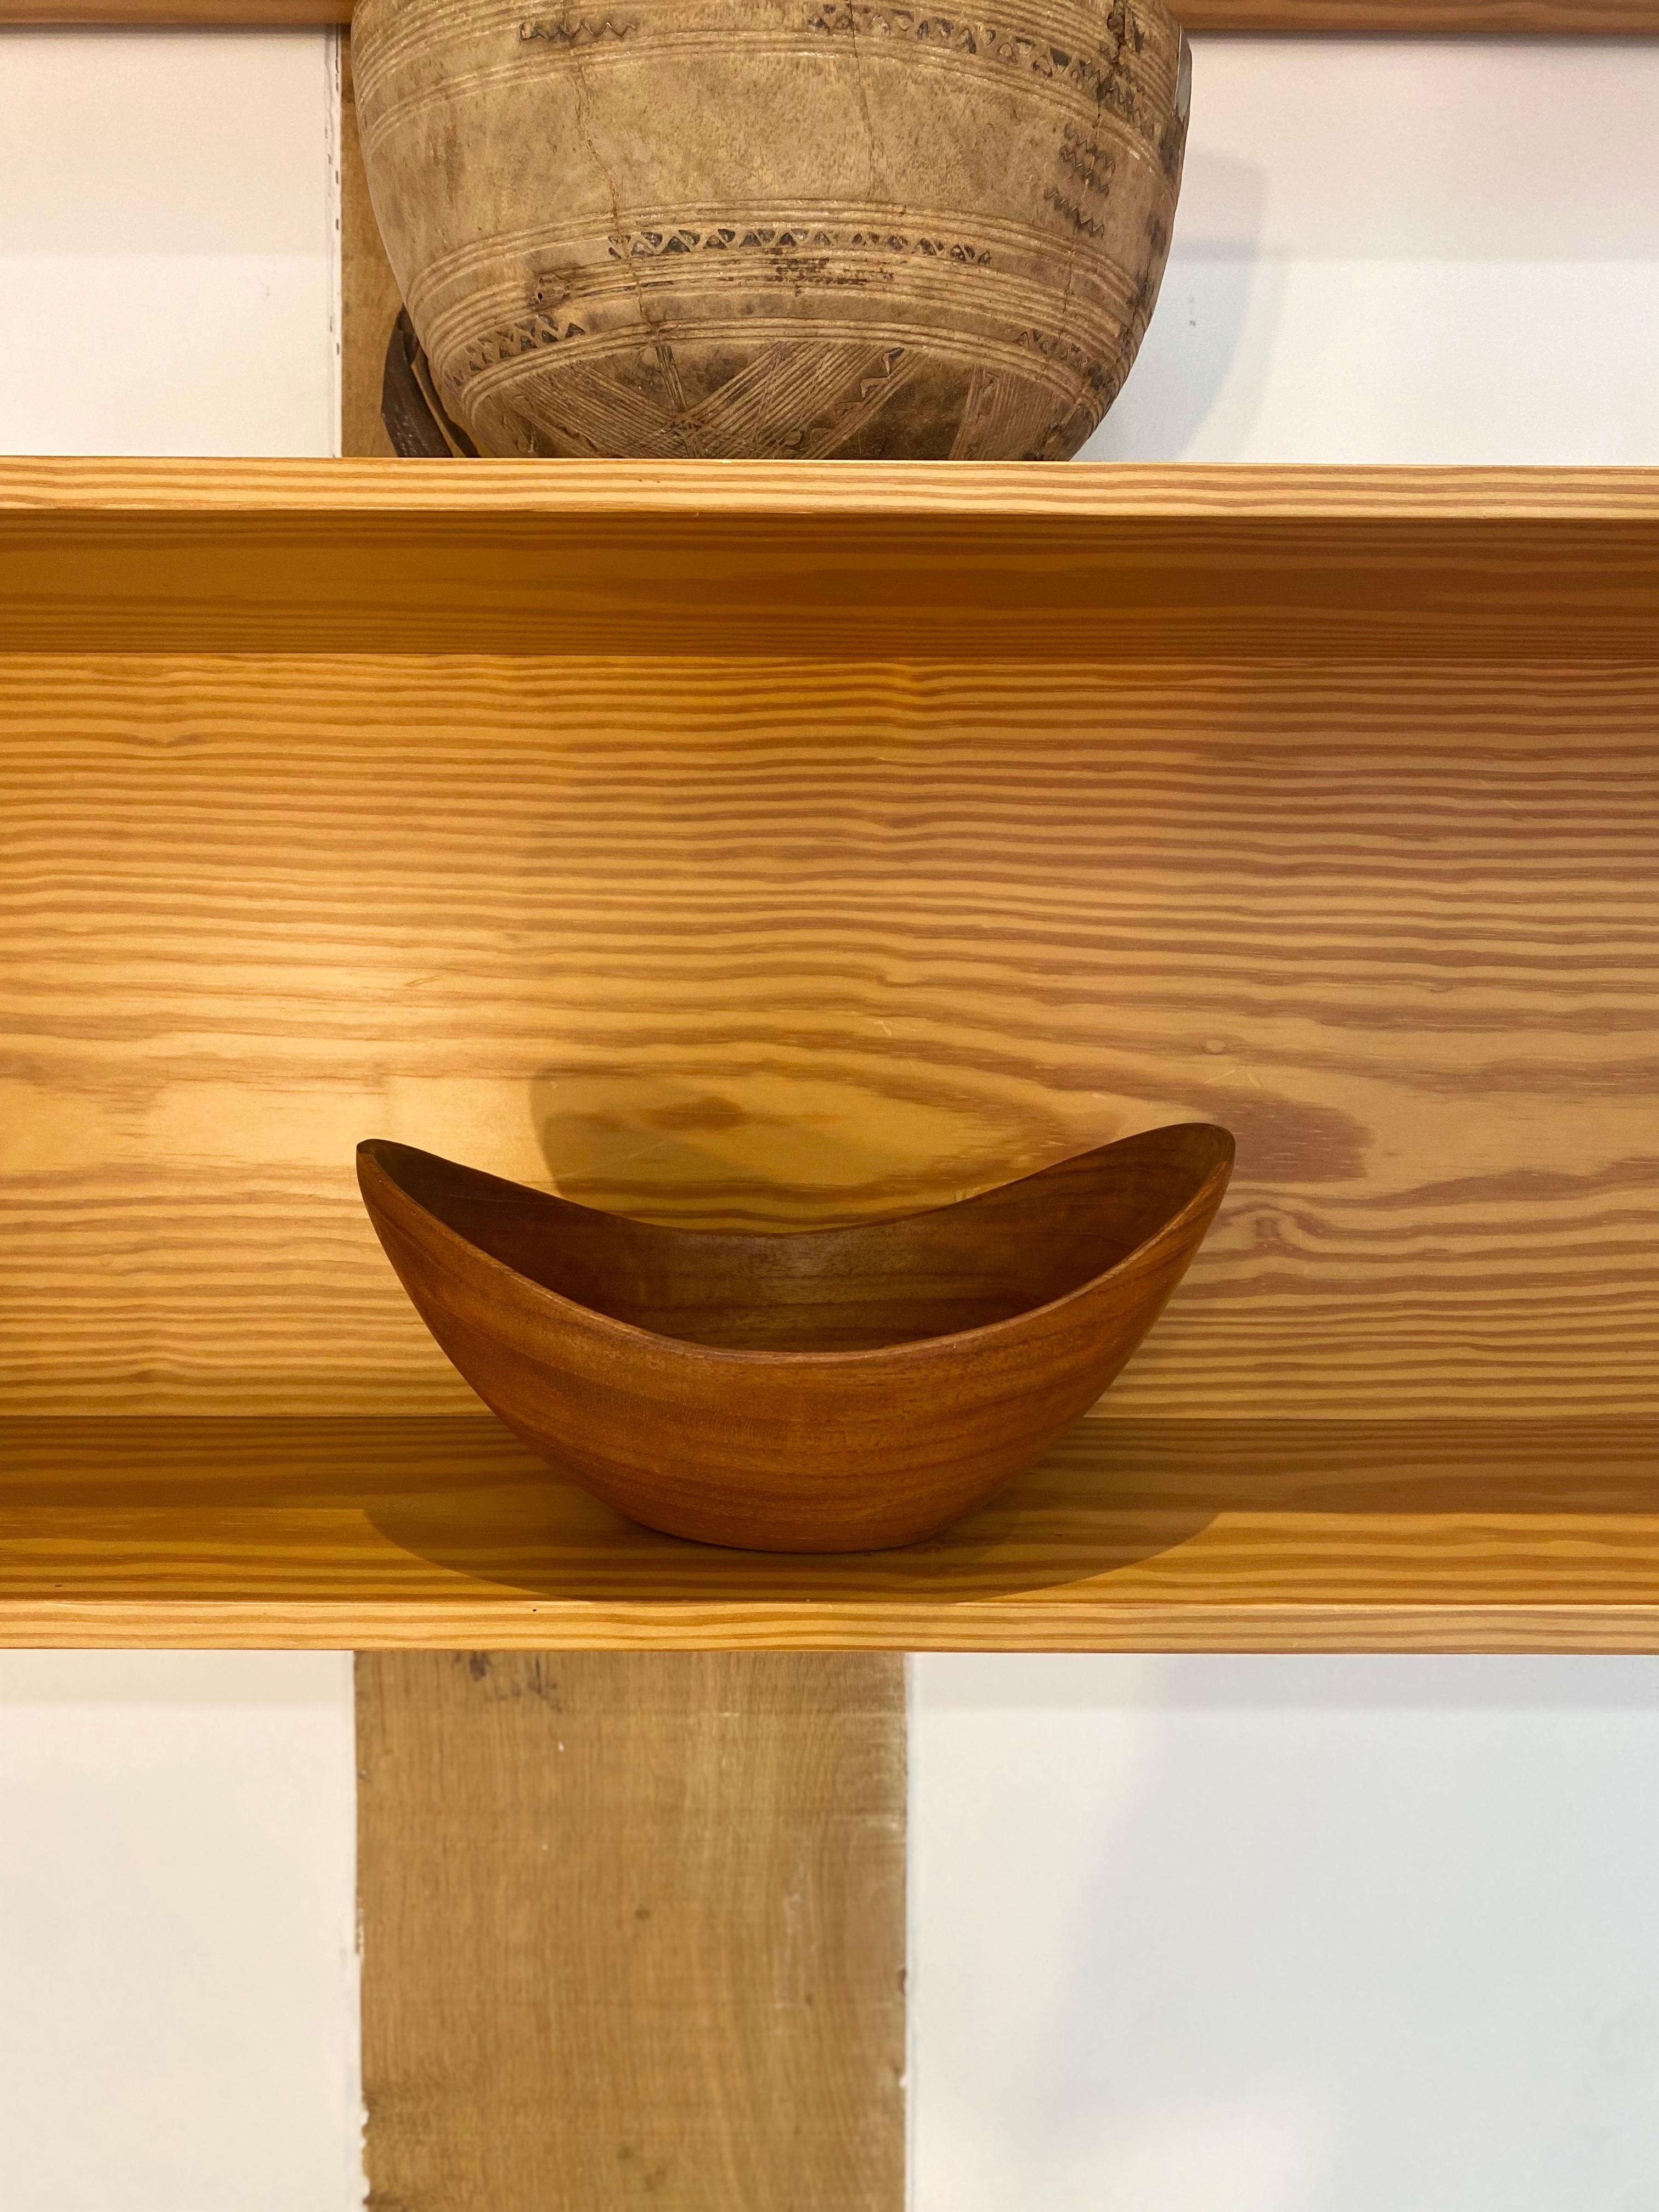 Teak bowl carved by the artist Stig Sandqvist in the 1950's from Sweden. Very nice curves of the lines with precise woodwork. The great Danish designer Finn Juhl created a very similar model.